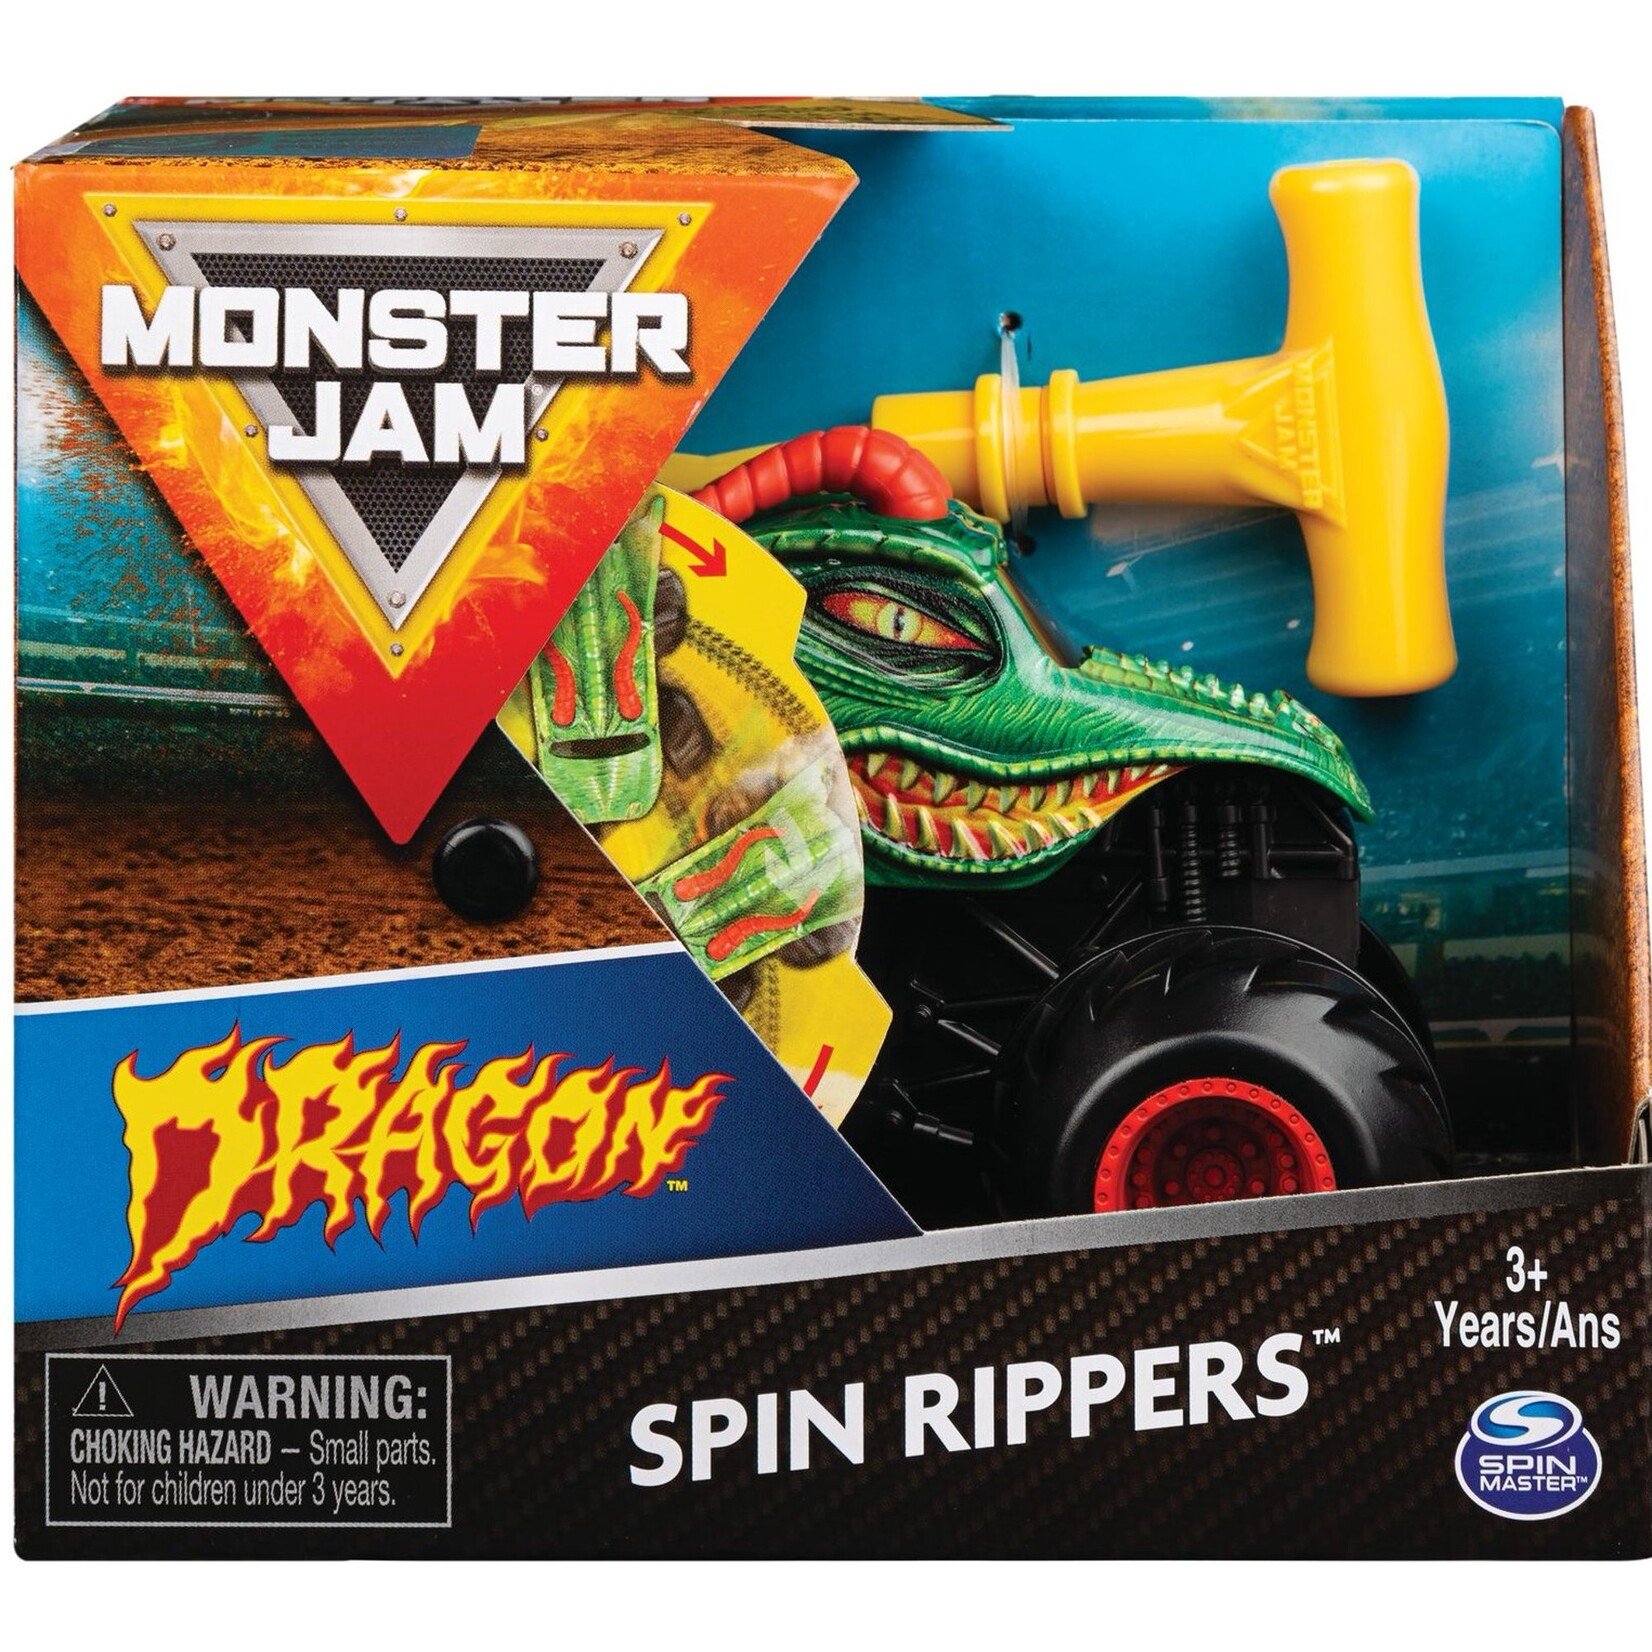 Spin Master Spin Rippers Dragon 1:43 Scale Monster Truck